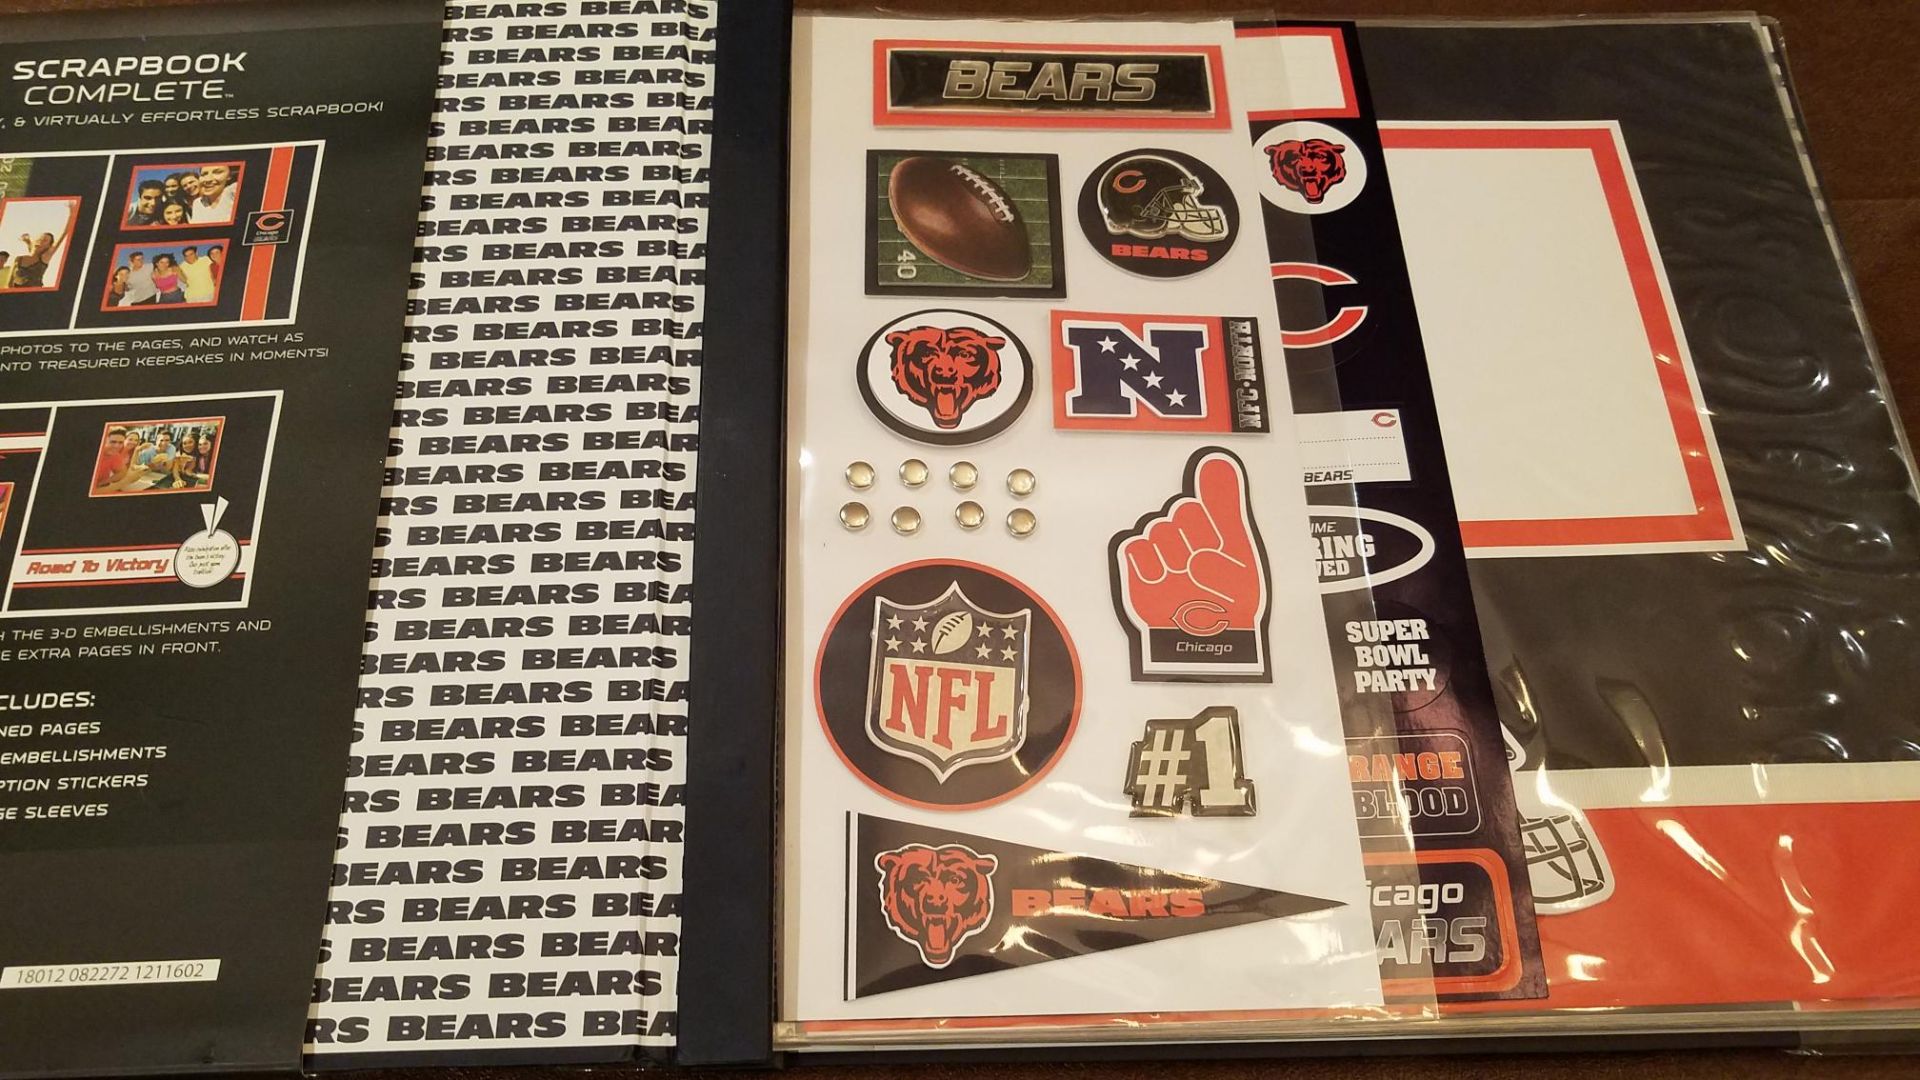 Chicago Bears 16-Page Scrapbook (Still in Protective Plastic) - Image 3 of 14